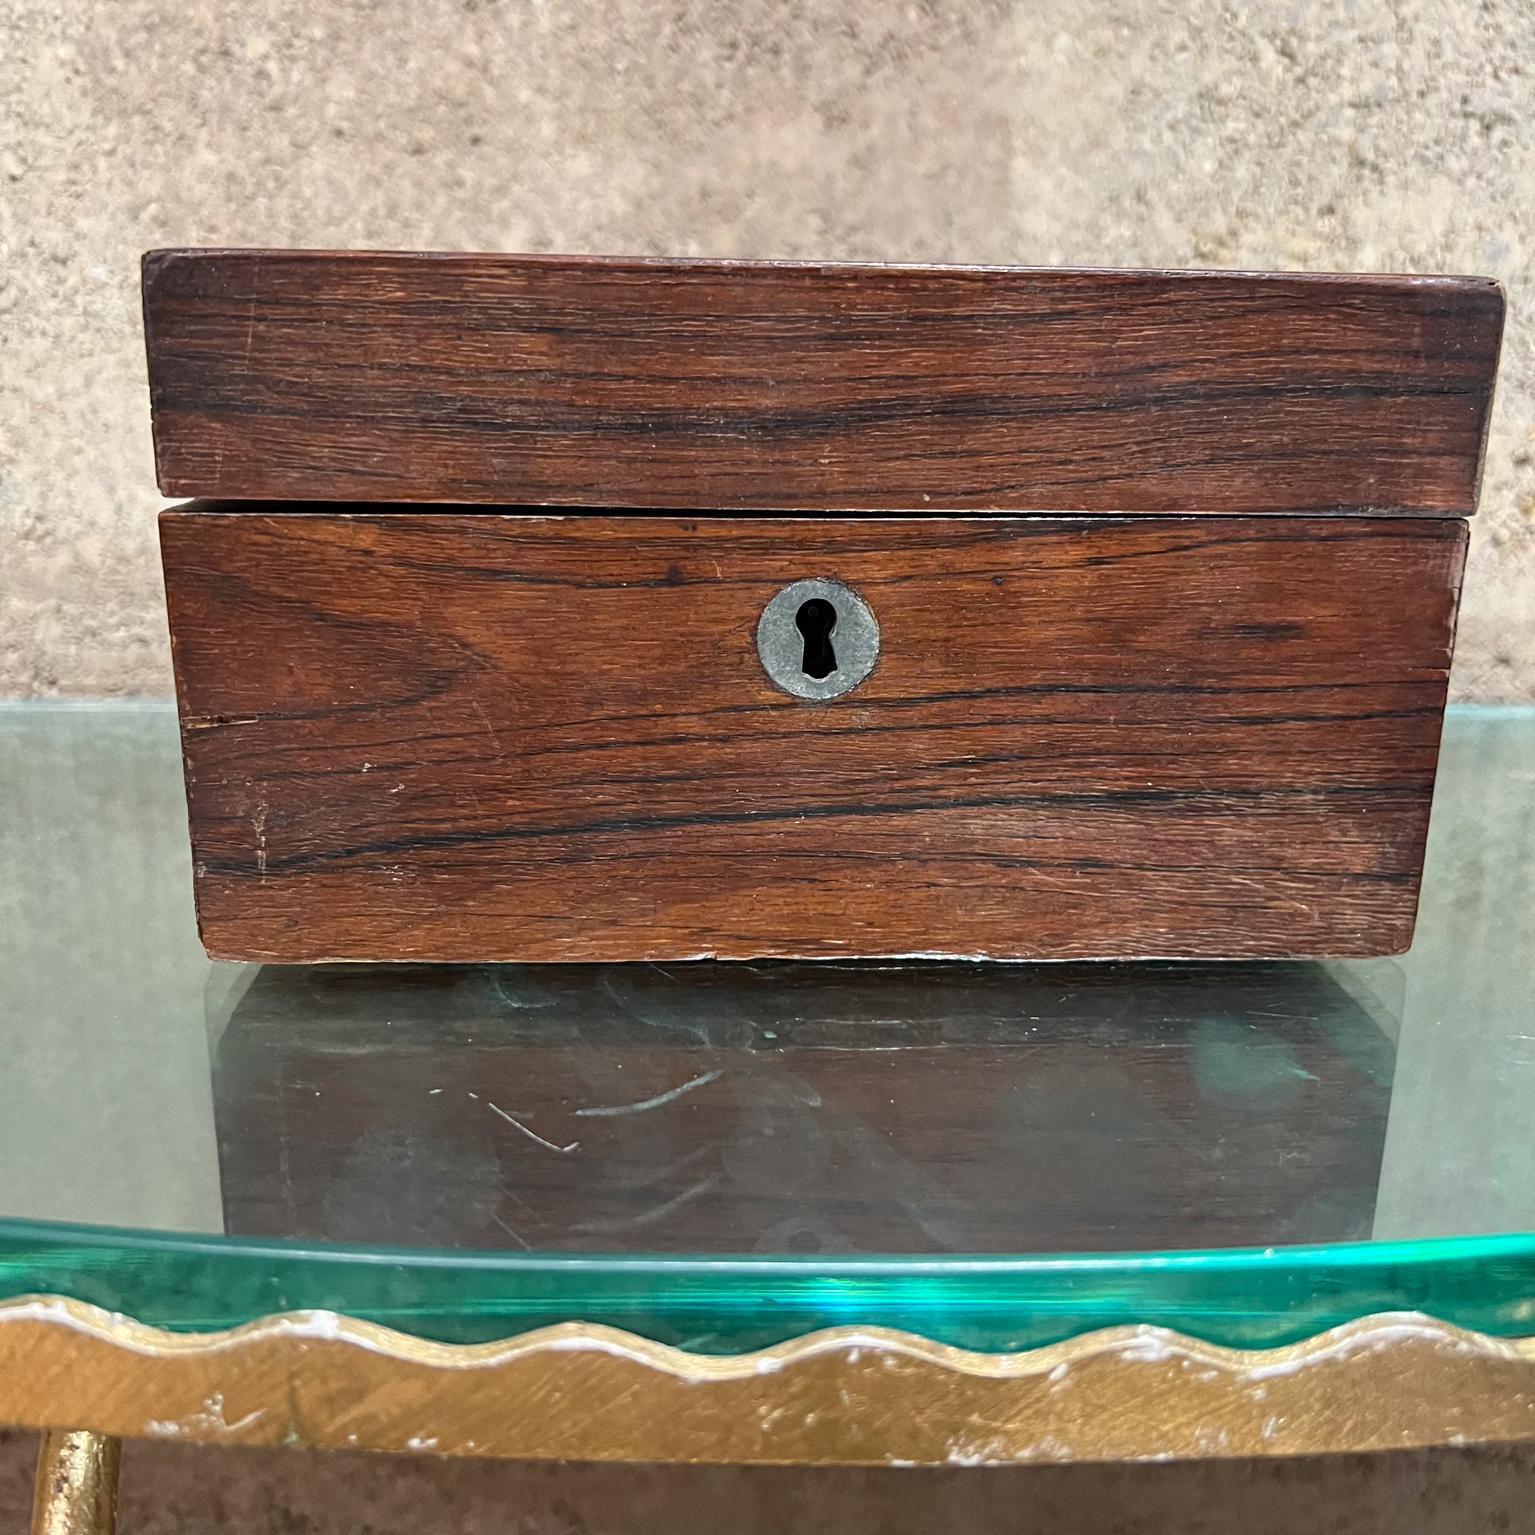 Small Rosewood Box vintage with clean modern lines.
Divided interior 
Rosewood veneer 
Preowned vintage unrestored condition. Some prior repairs are visible. 
No key.
3.75 tall x 7 w x 4.75 d
Refer to images please.